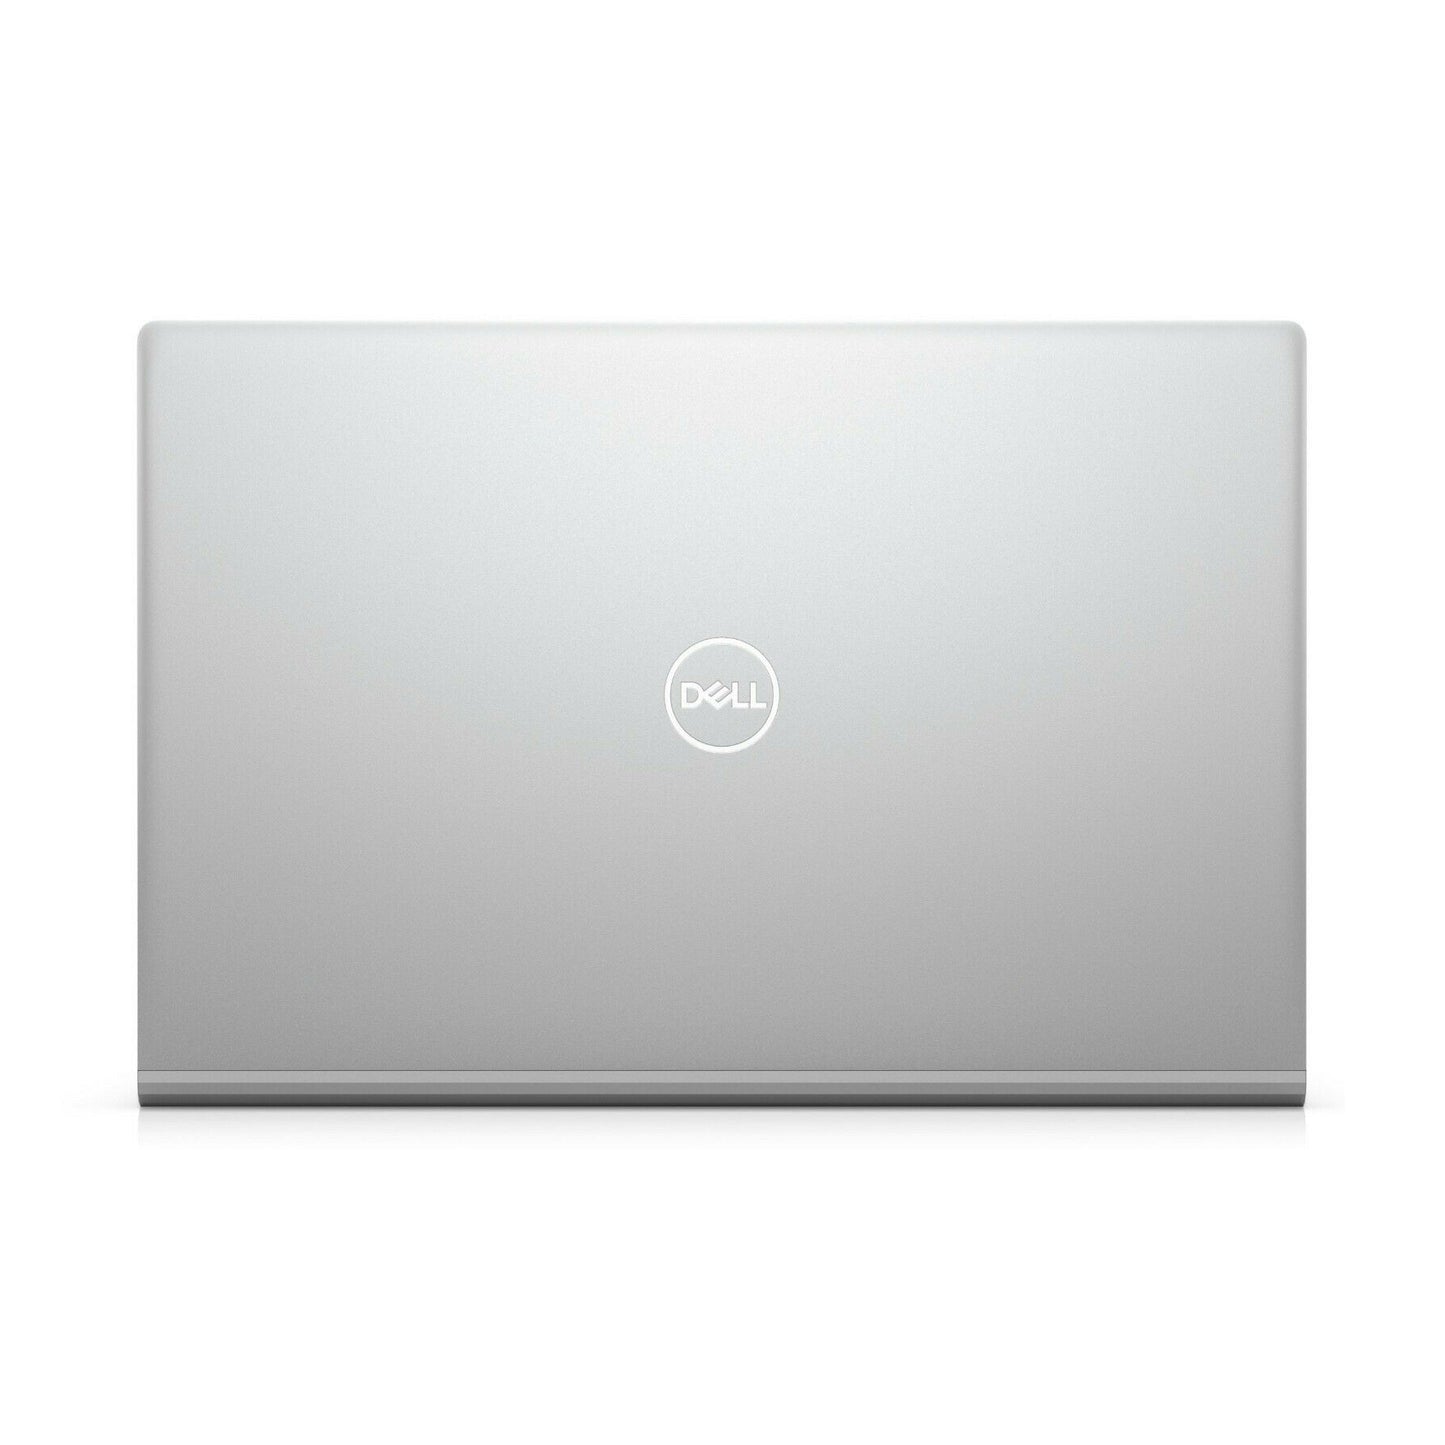 Dell Inspiron 5301 Core i7-1165g7 MX350 2gb Up-To 6gb Laptop (New OB)